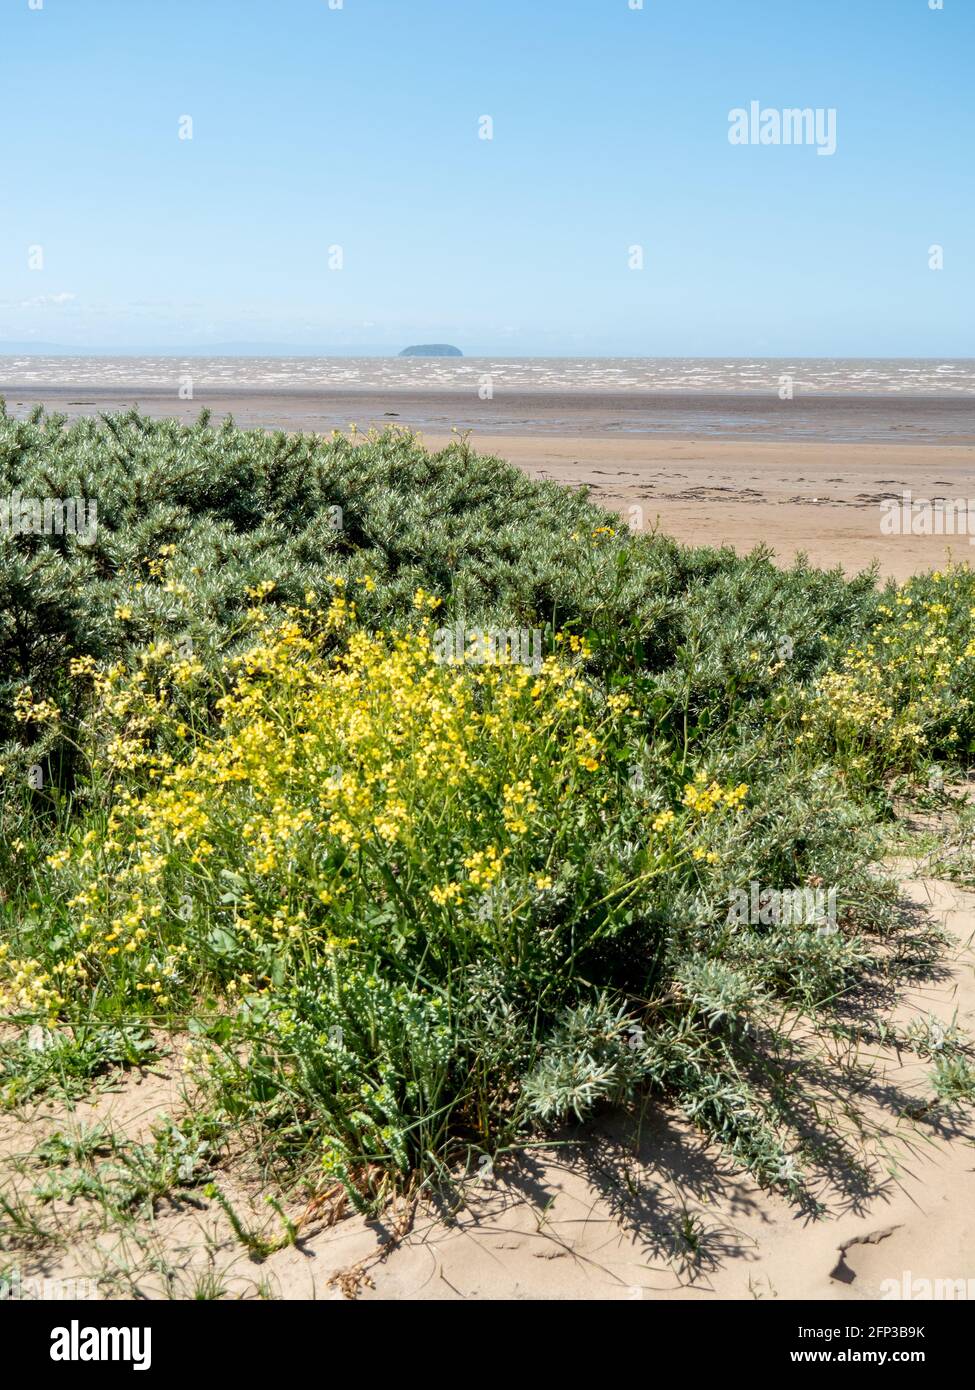 A dune on Sand Bay, near Weston-super-Mare, looking out across the Bristol Channel and Steepholm Island. Stock Photo